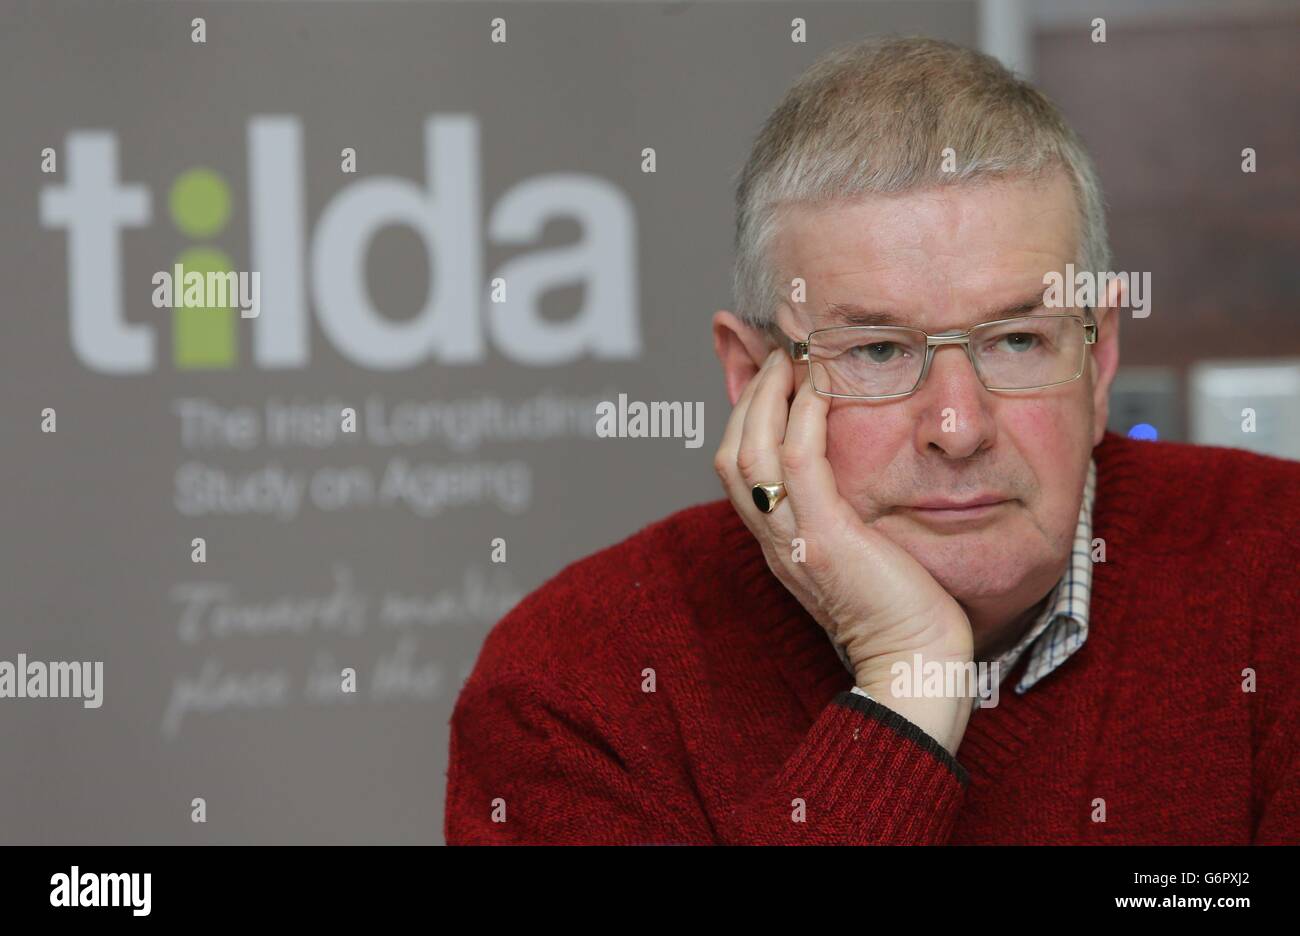 Journalist Paddy Clancy at the launch of the second series of results from the Irish Longitudinal Study on Ageing (Tilda), a national study of more than 7,000 older people aged 50 and over at Trinity College Dublin. Stock Photo